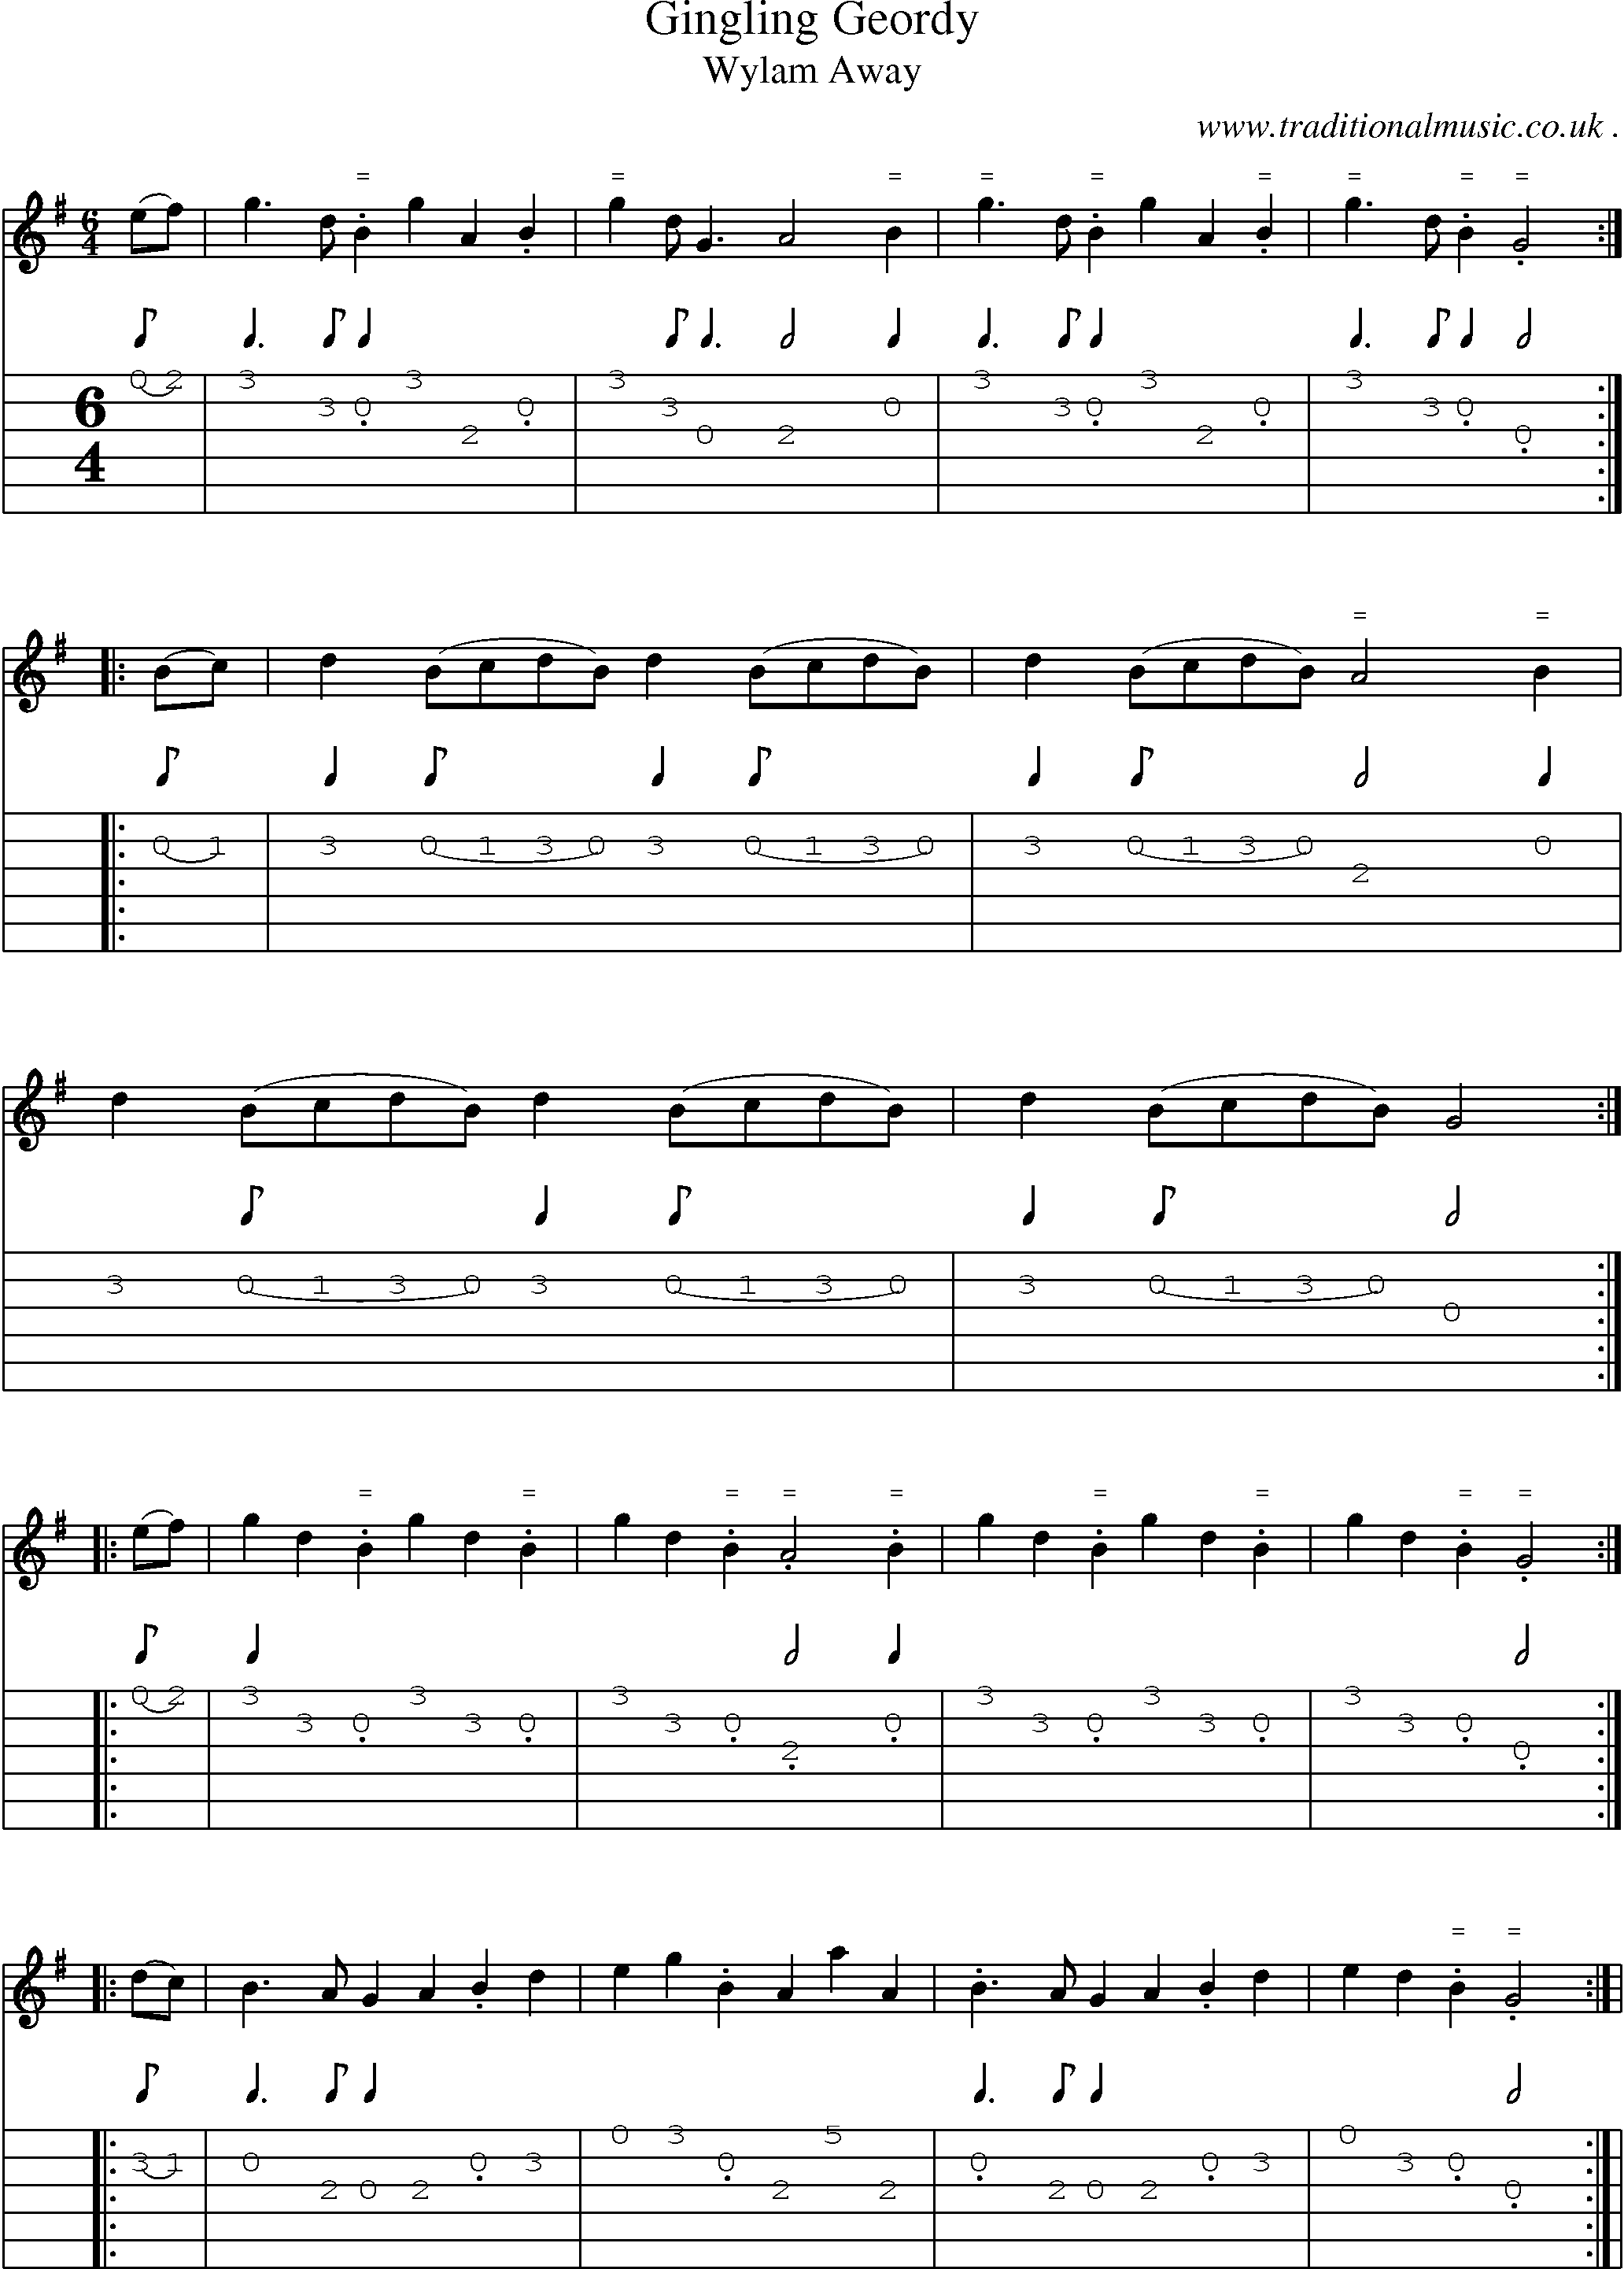 Sheet-Music and Guitar Tabs for Gingling Geordy